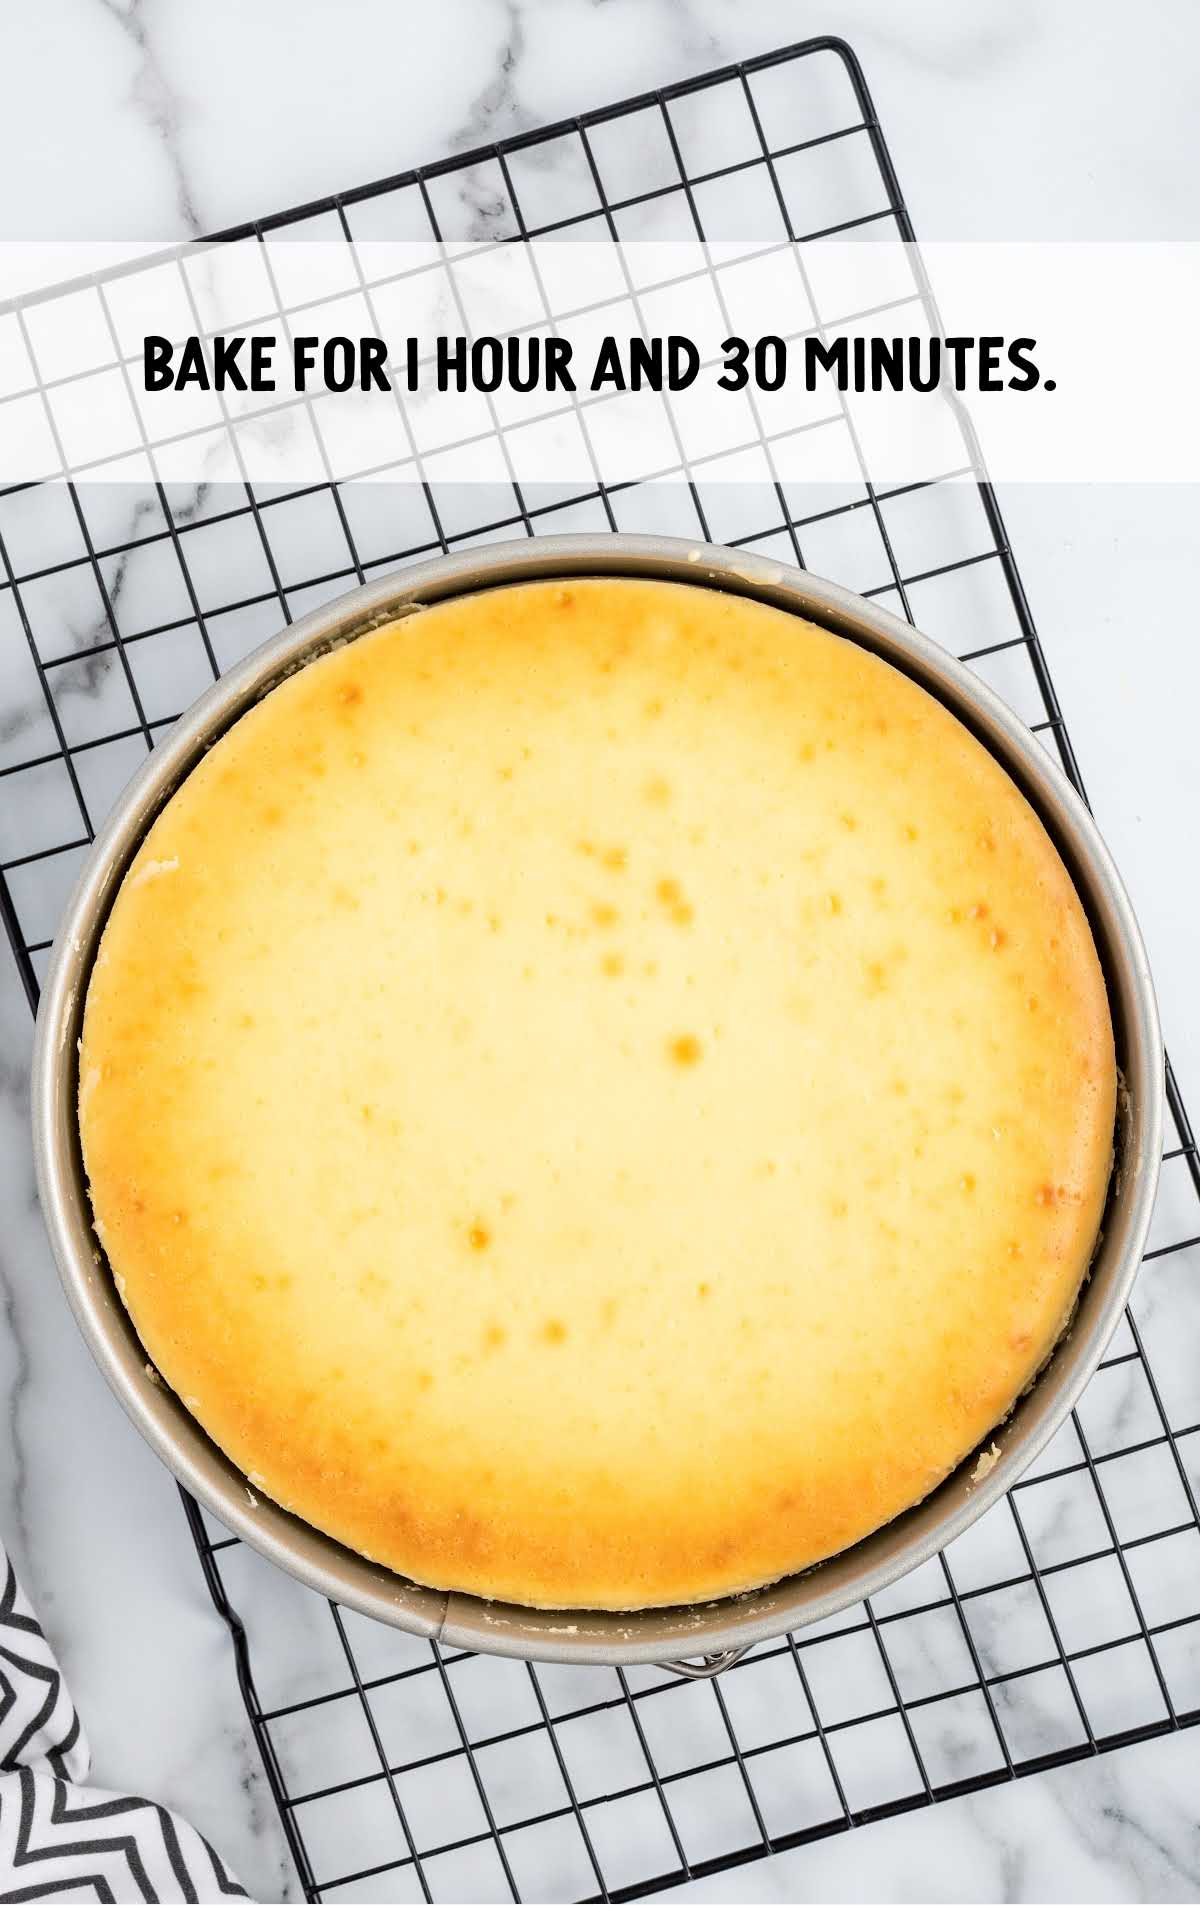 bake cheesecake for an hour